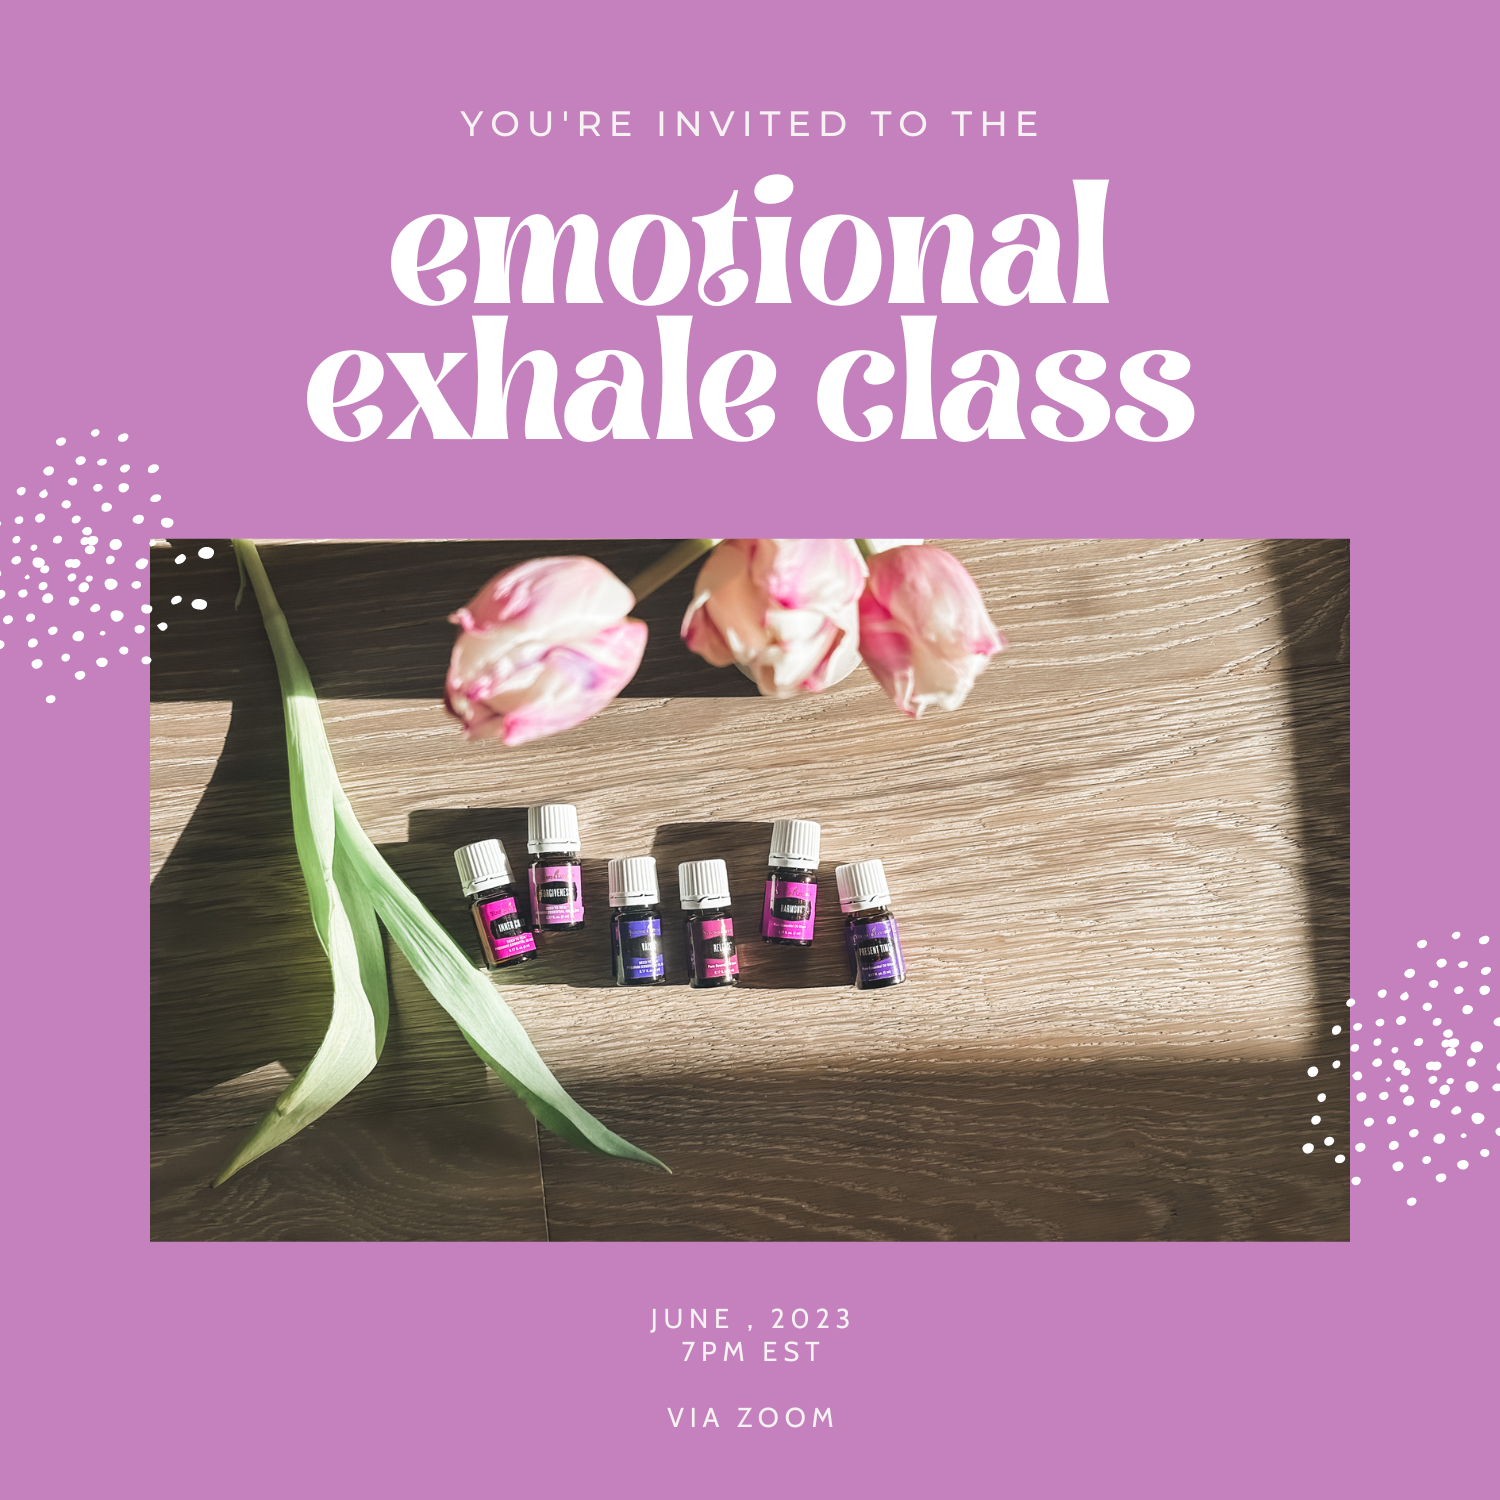 Emotional Exhale with Essential Oils